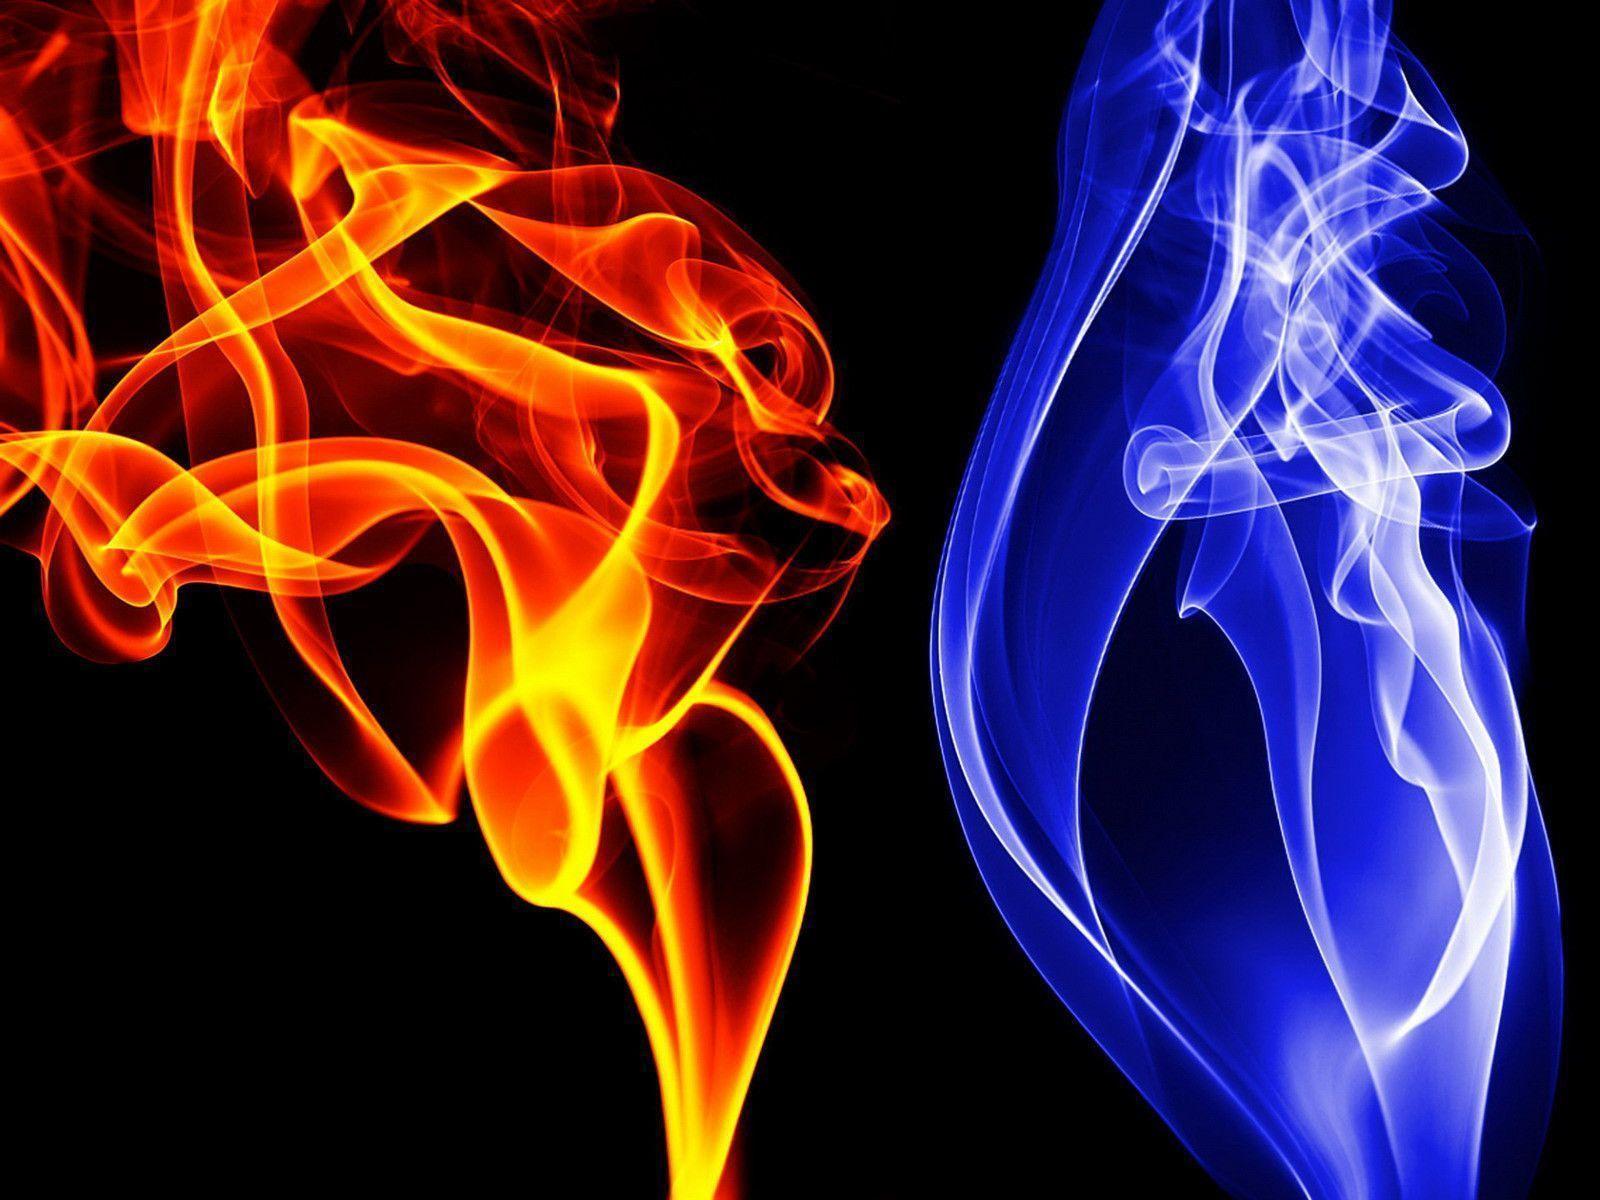 Red Blue Flames Abstract Desktop 1600x1200 Wanted Wallpaper